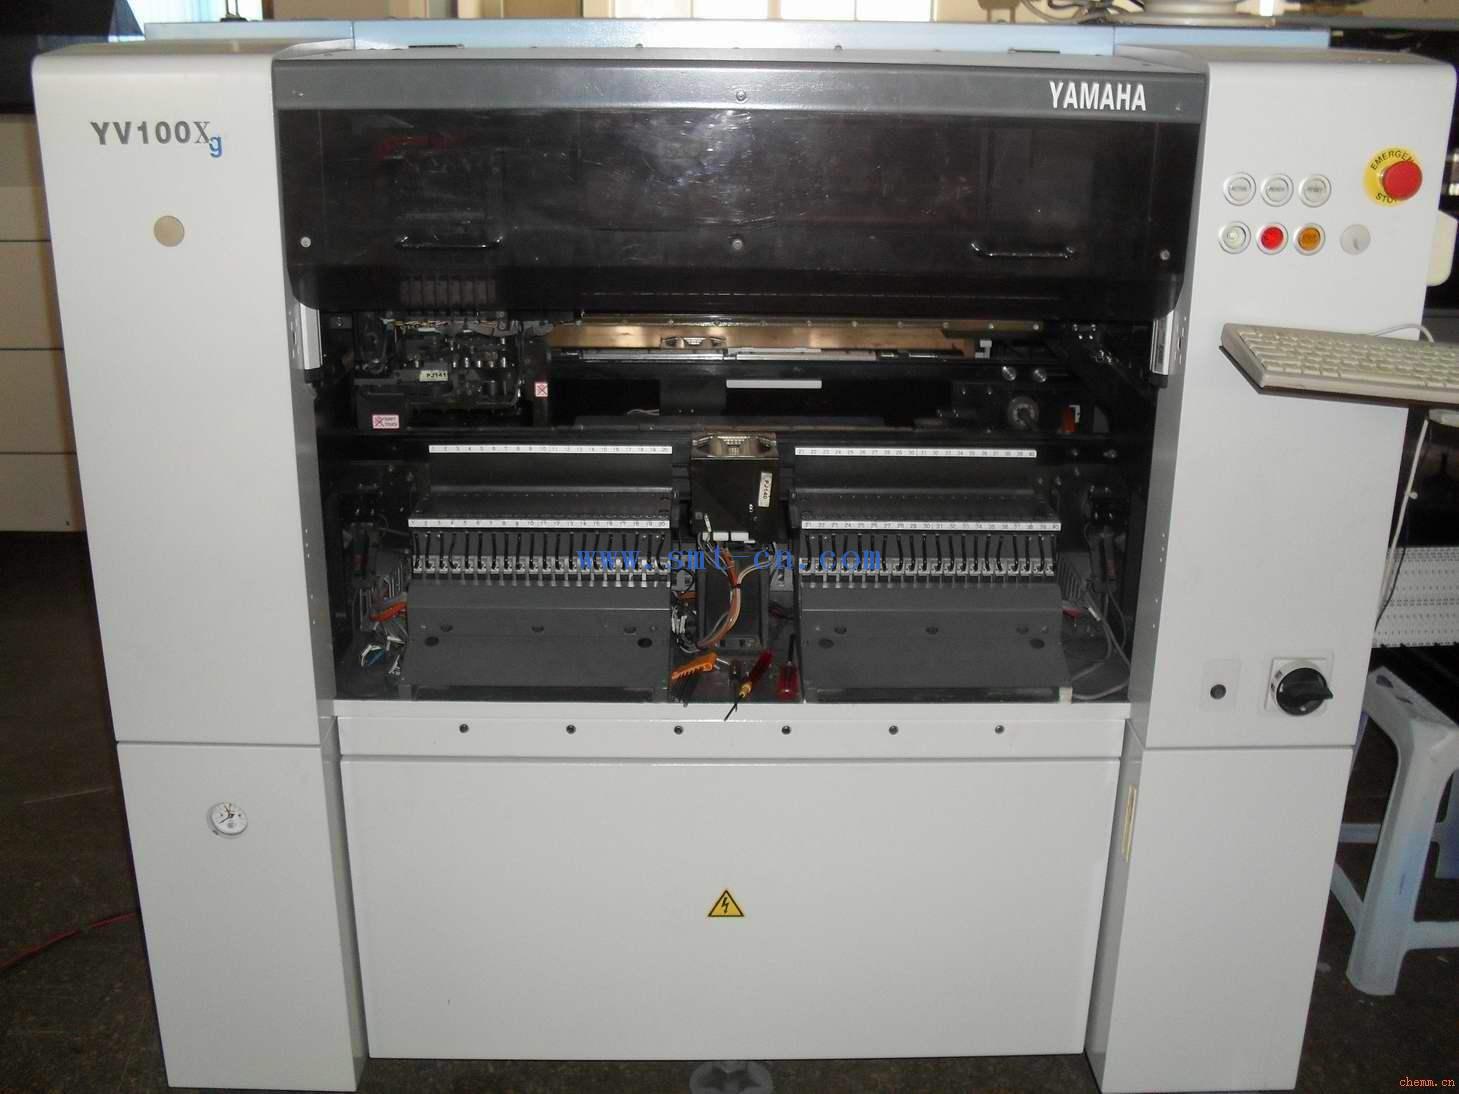 YV100XG Machine Original used for sale and Repurchase